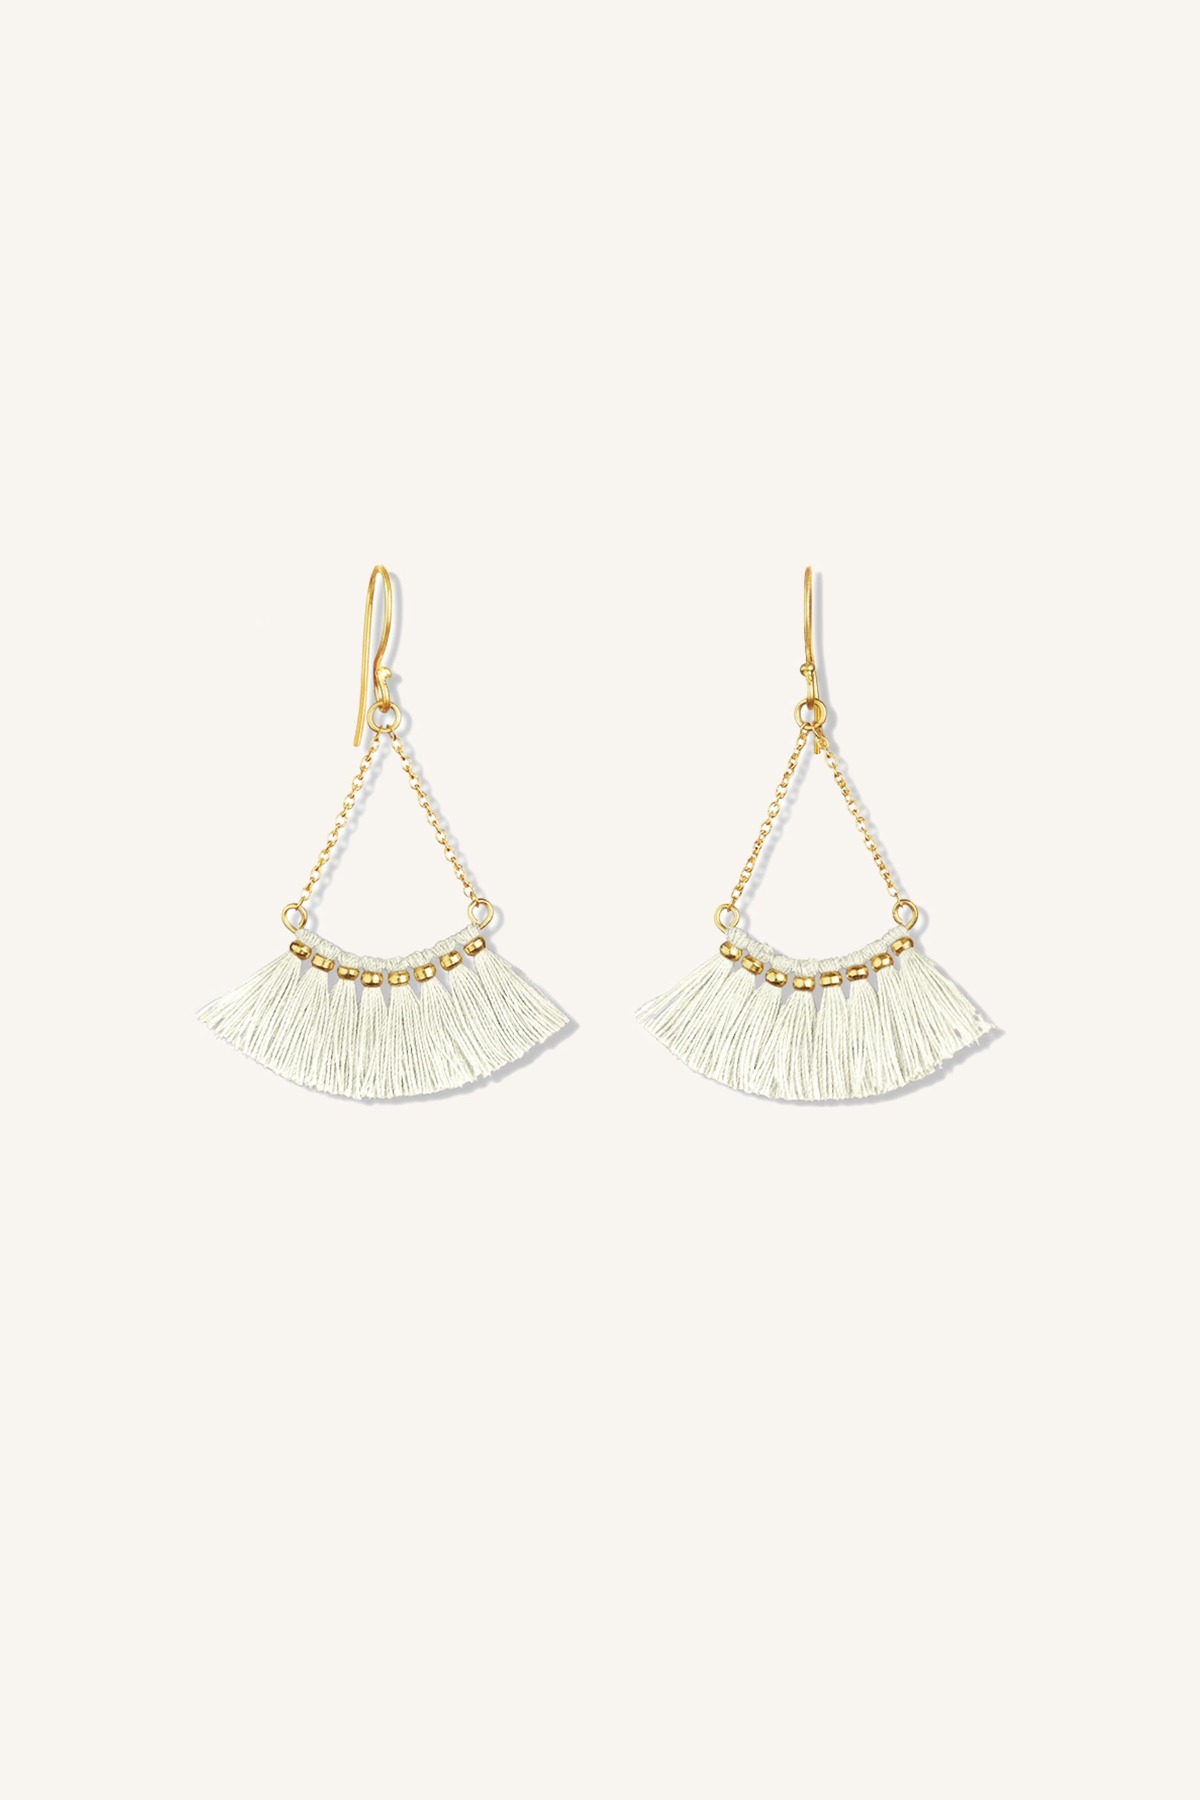 by-bar - pd romee earring - off white